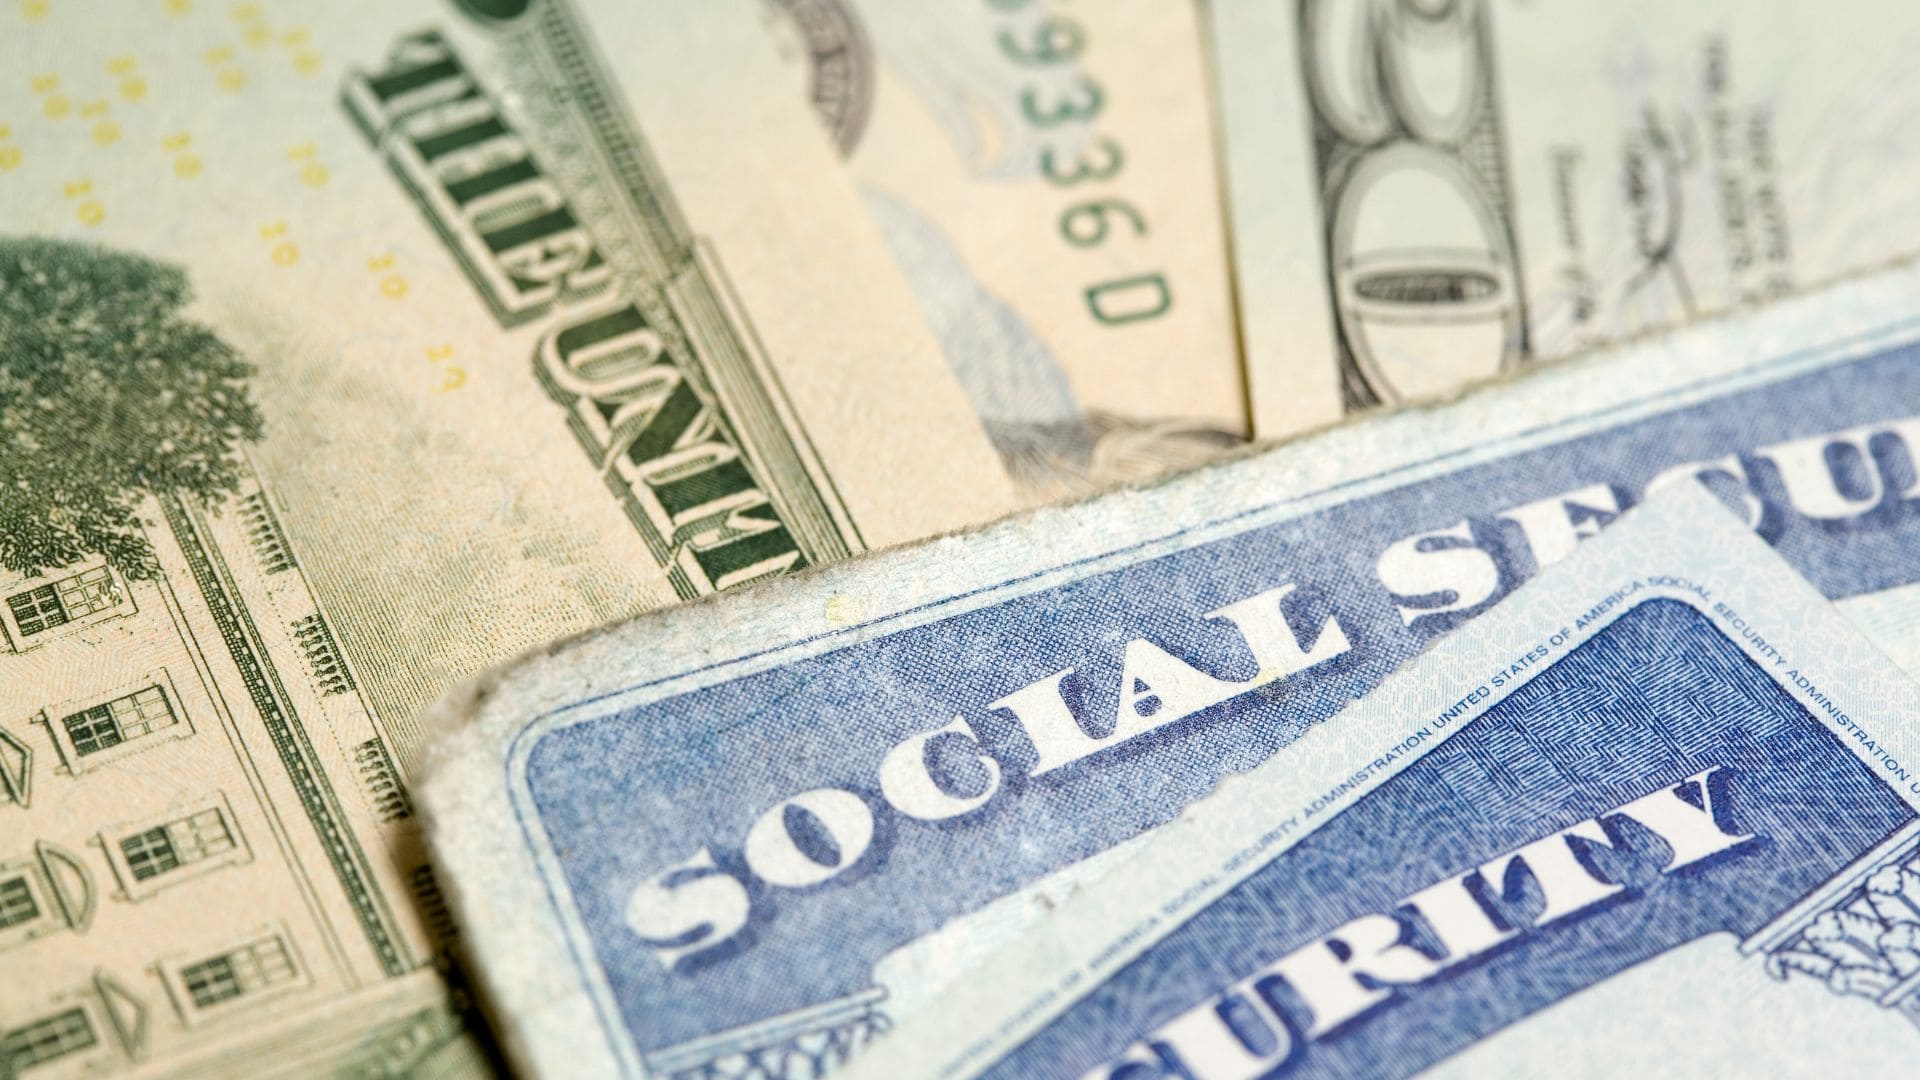 Today you could get a Social Security payment